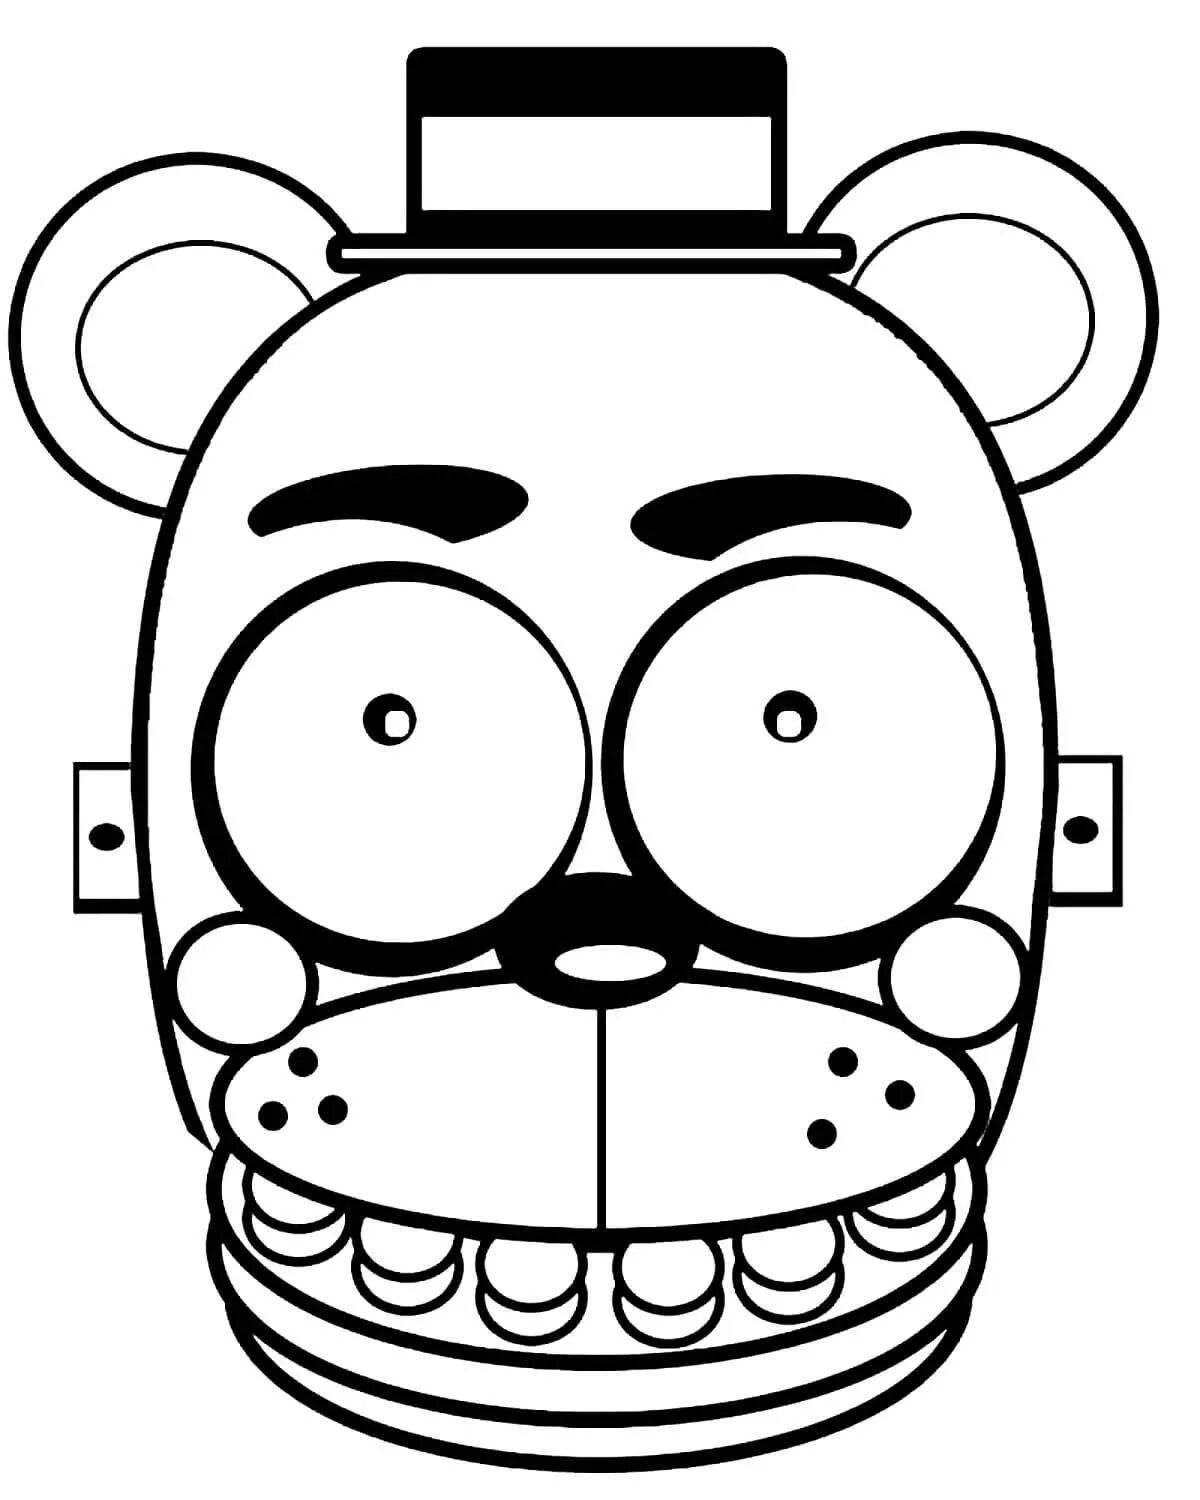 Magic animatronic left-handed coloring book